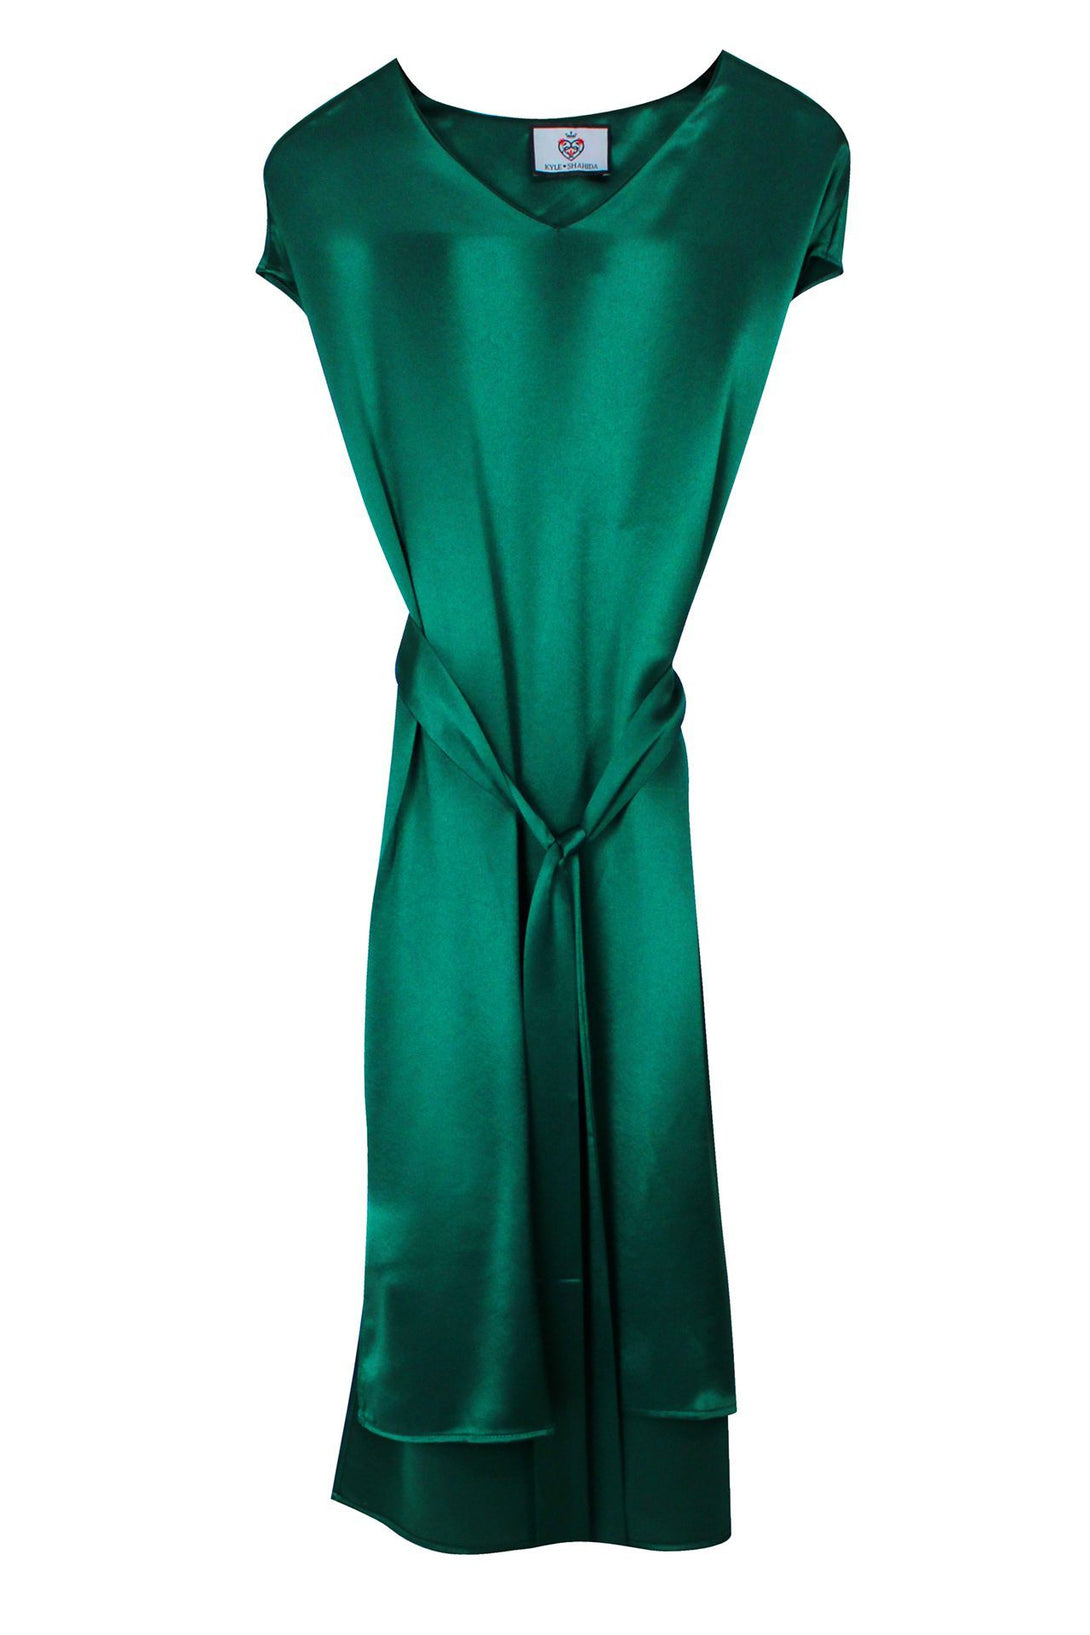 Mini-Dress-For-Womens-In-Green-By-kyle-Richard